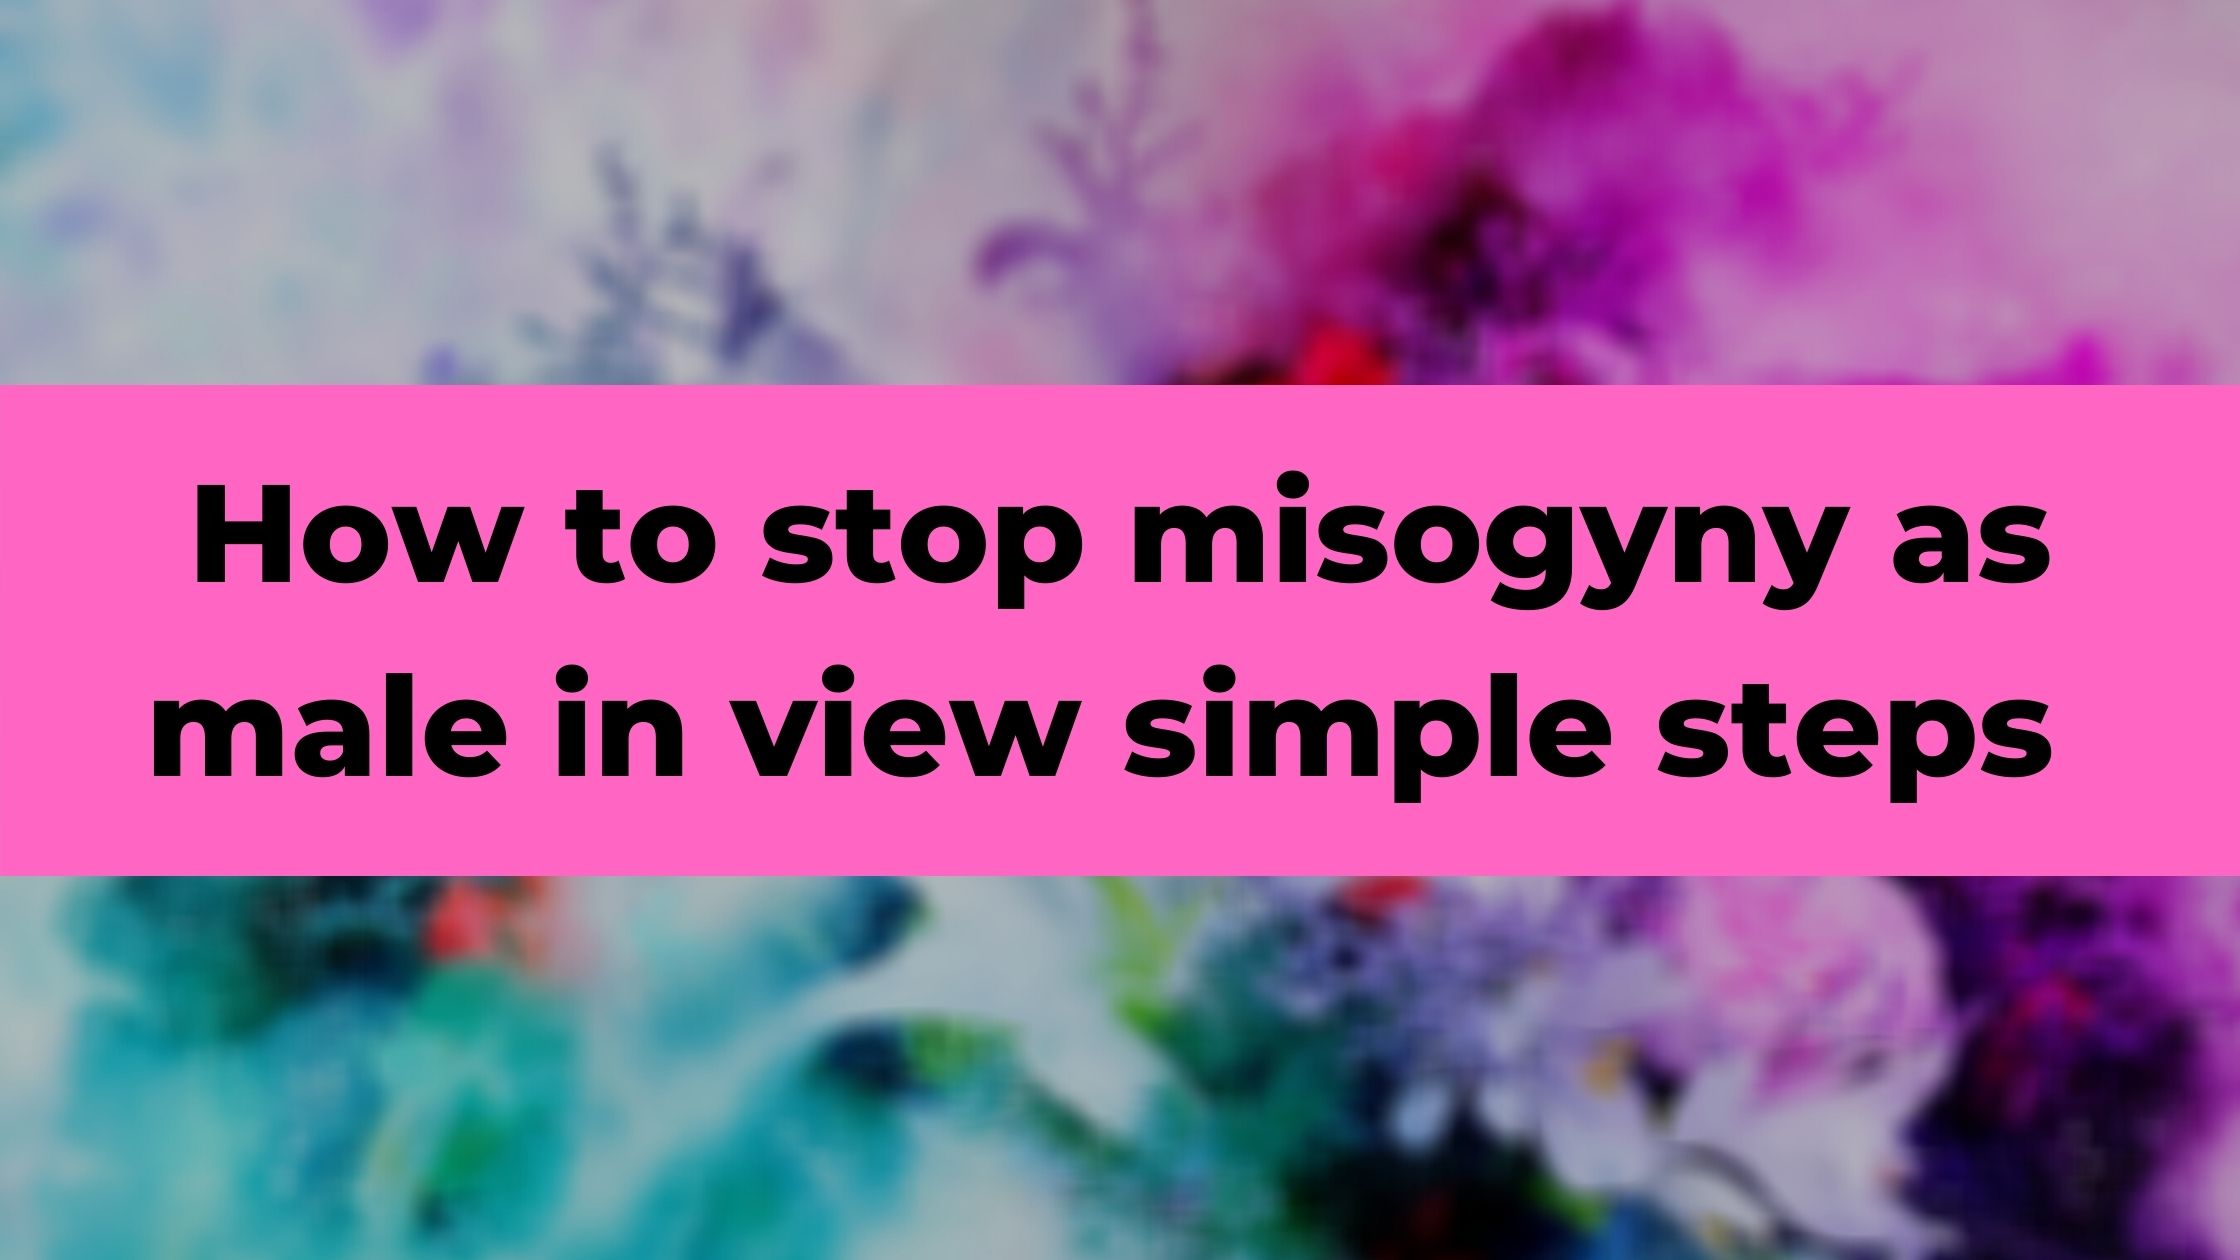 How to stop misogyny as male in view simple steps